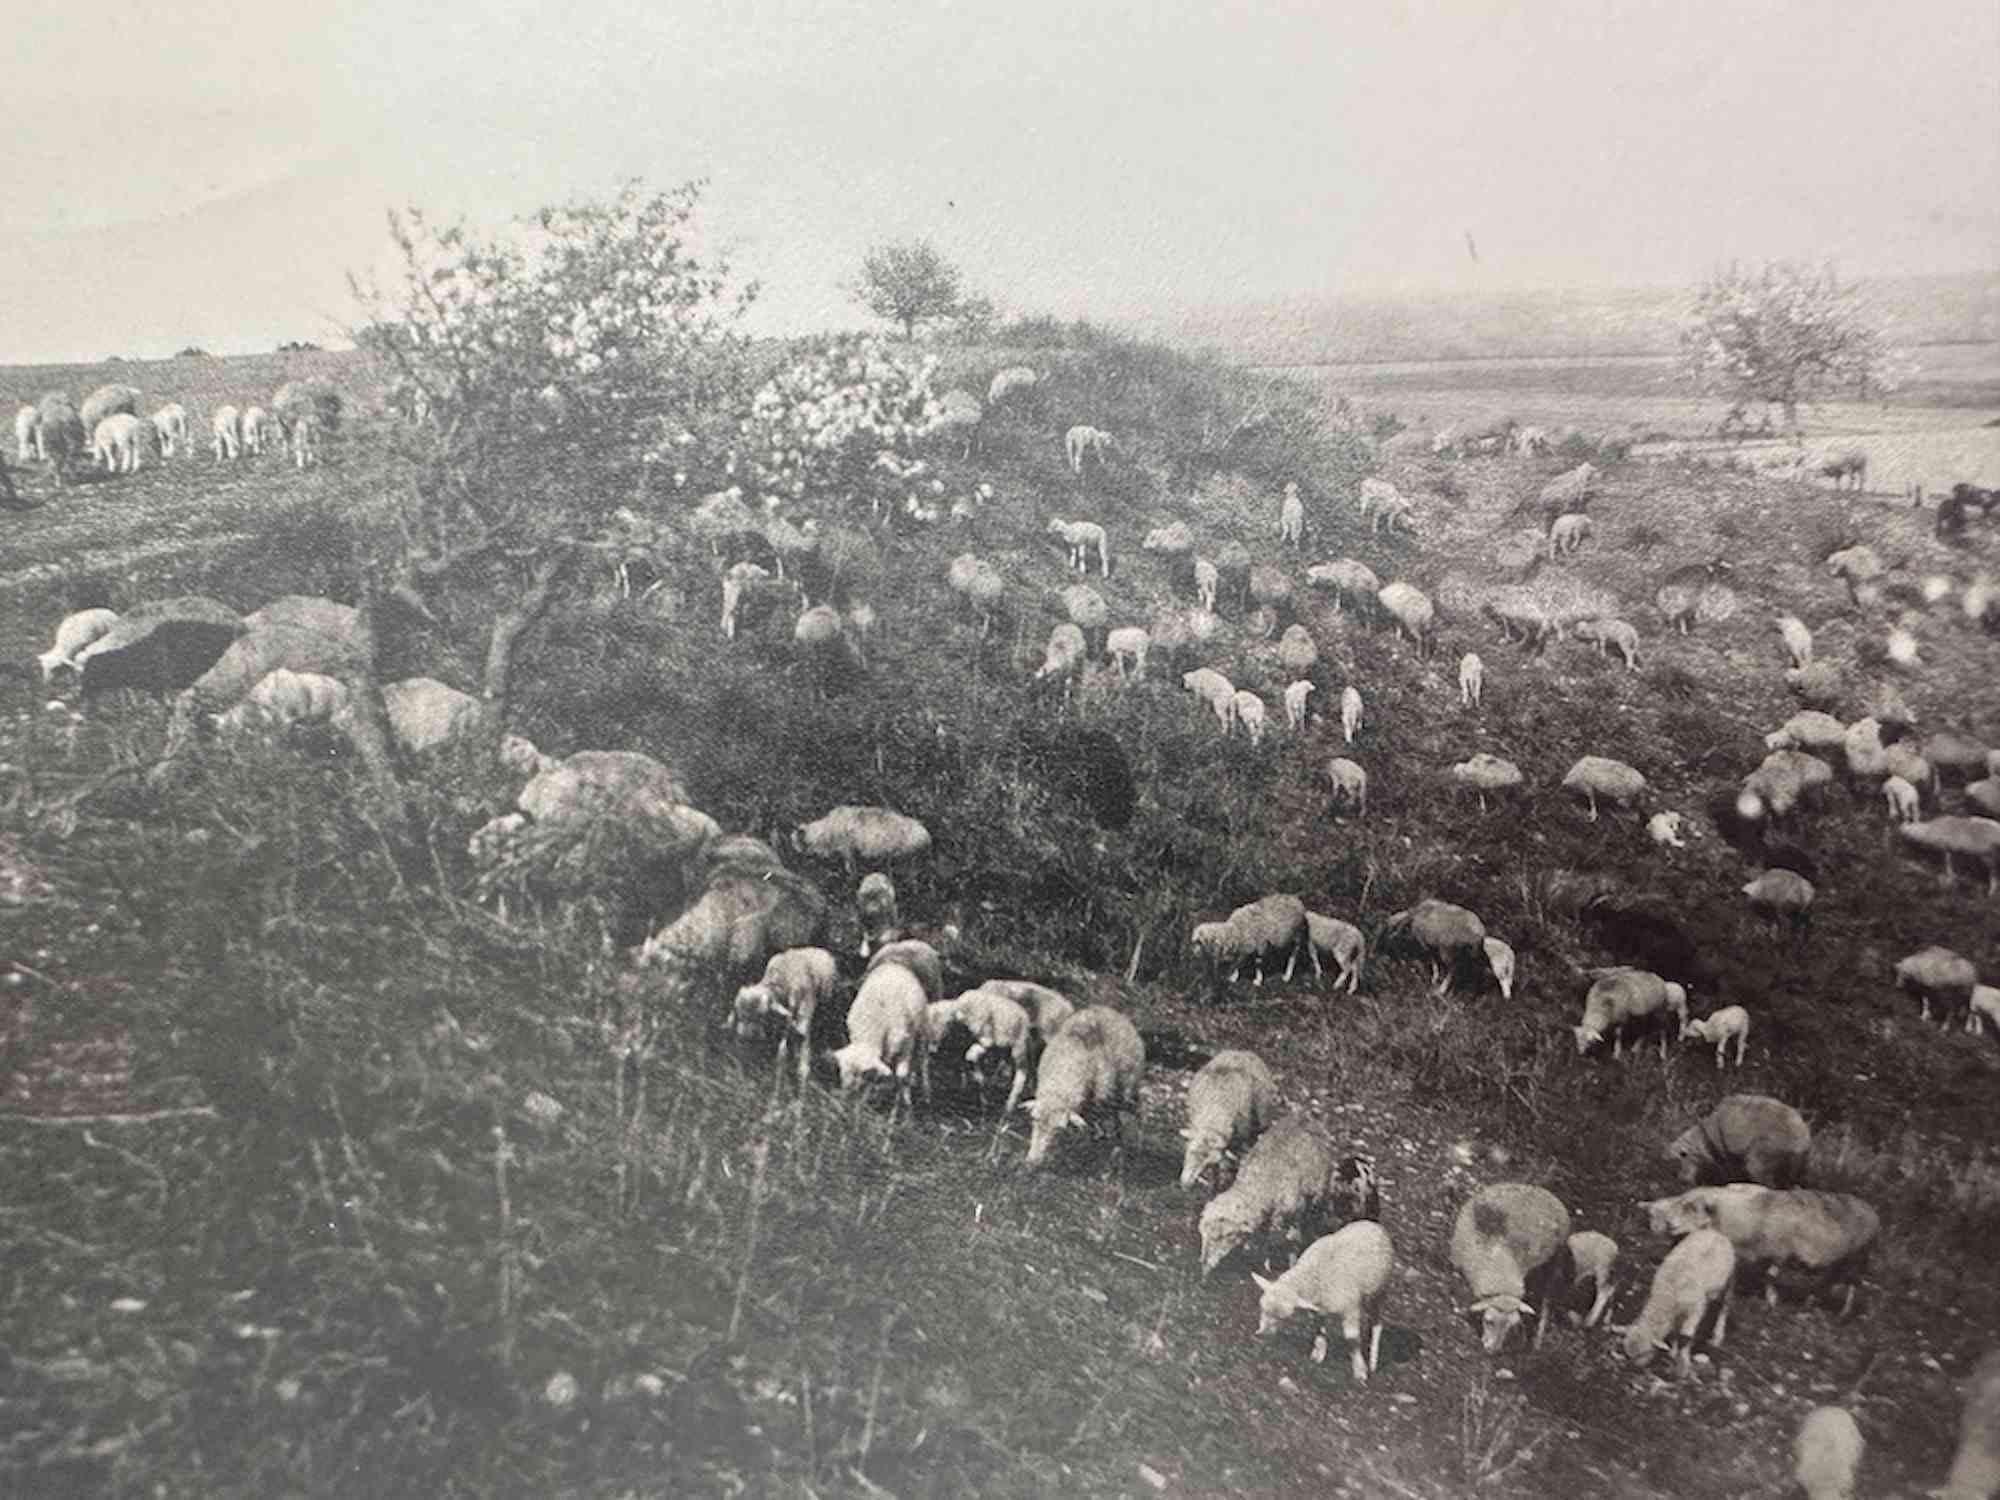 Old Days  - Animals in the Tuscan Maremma - Vintage Photo - Early 20th Century